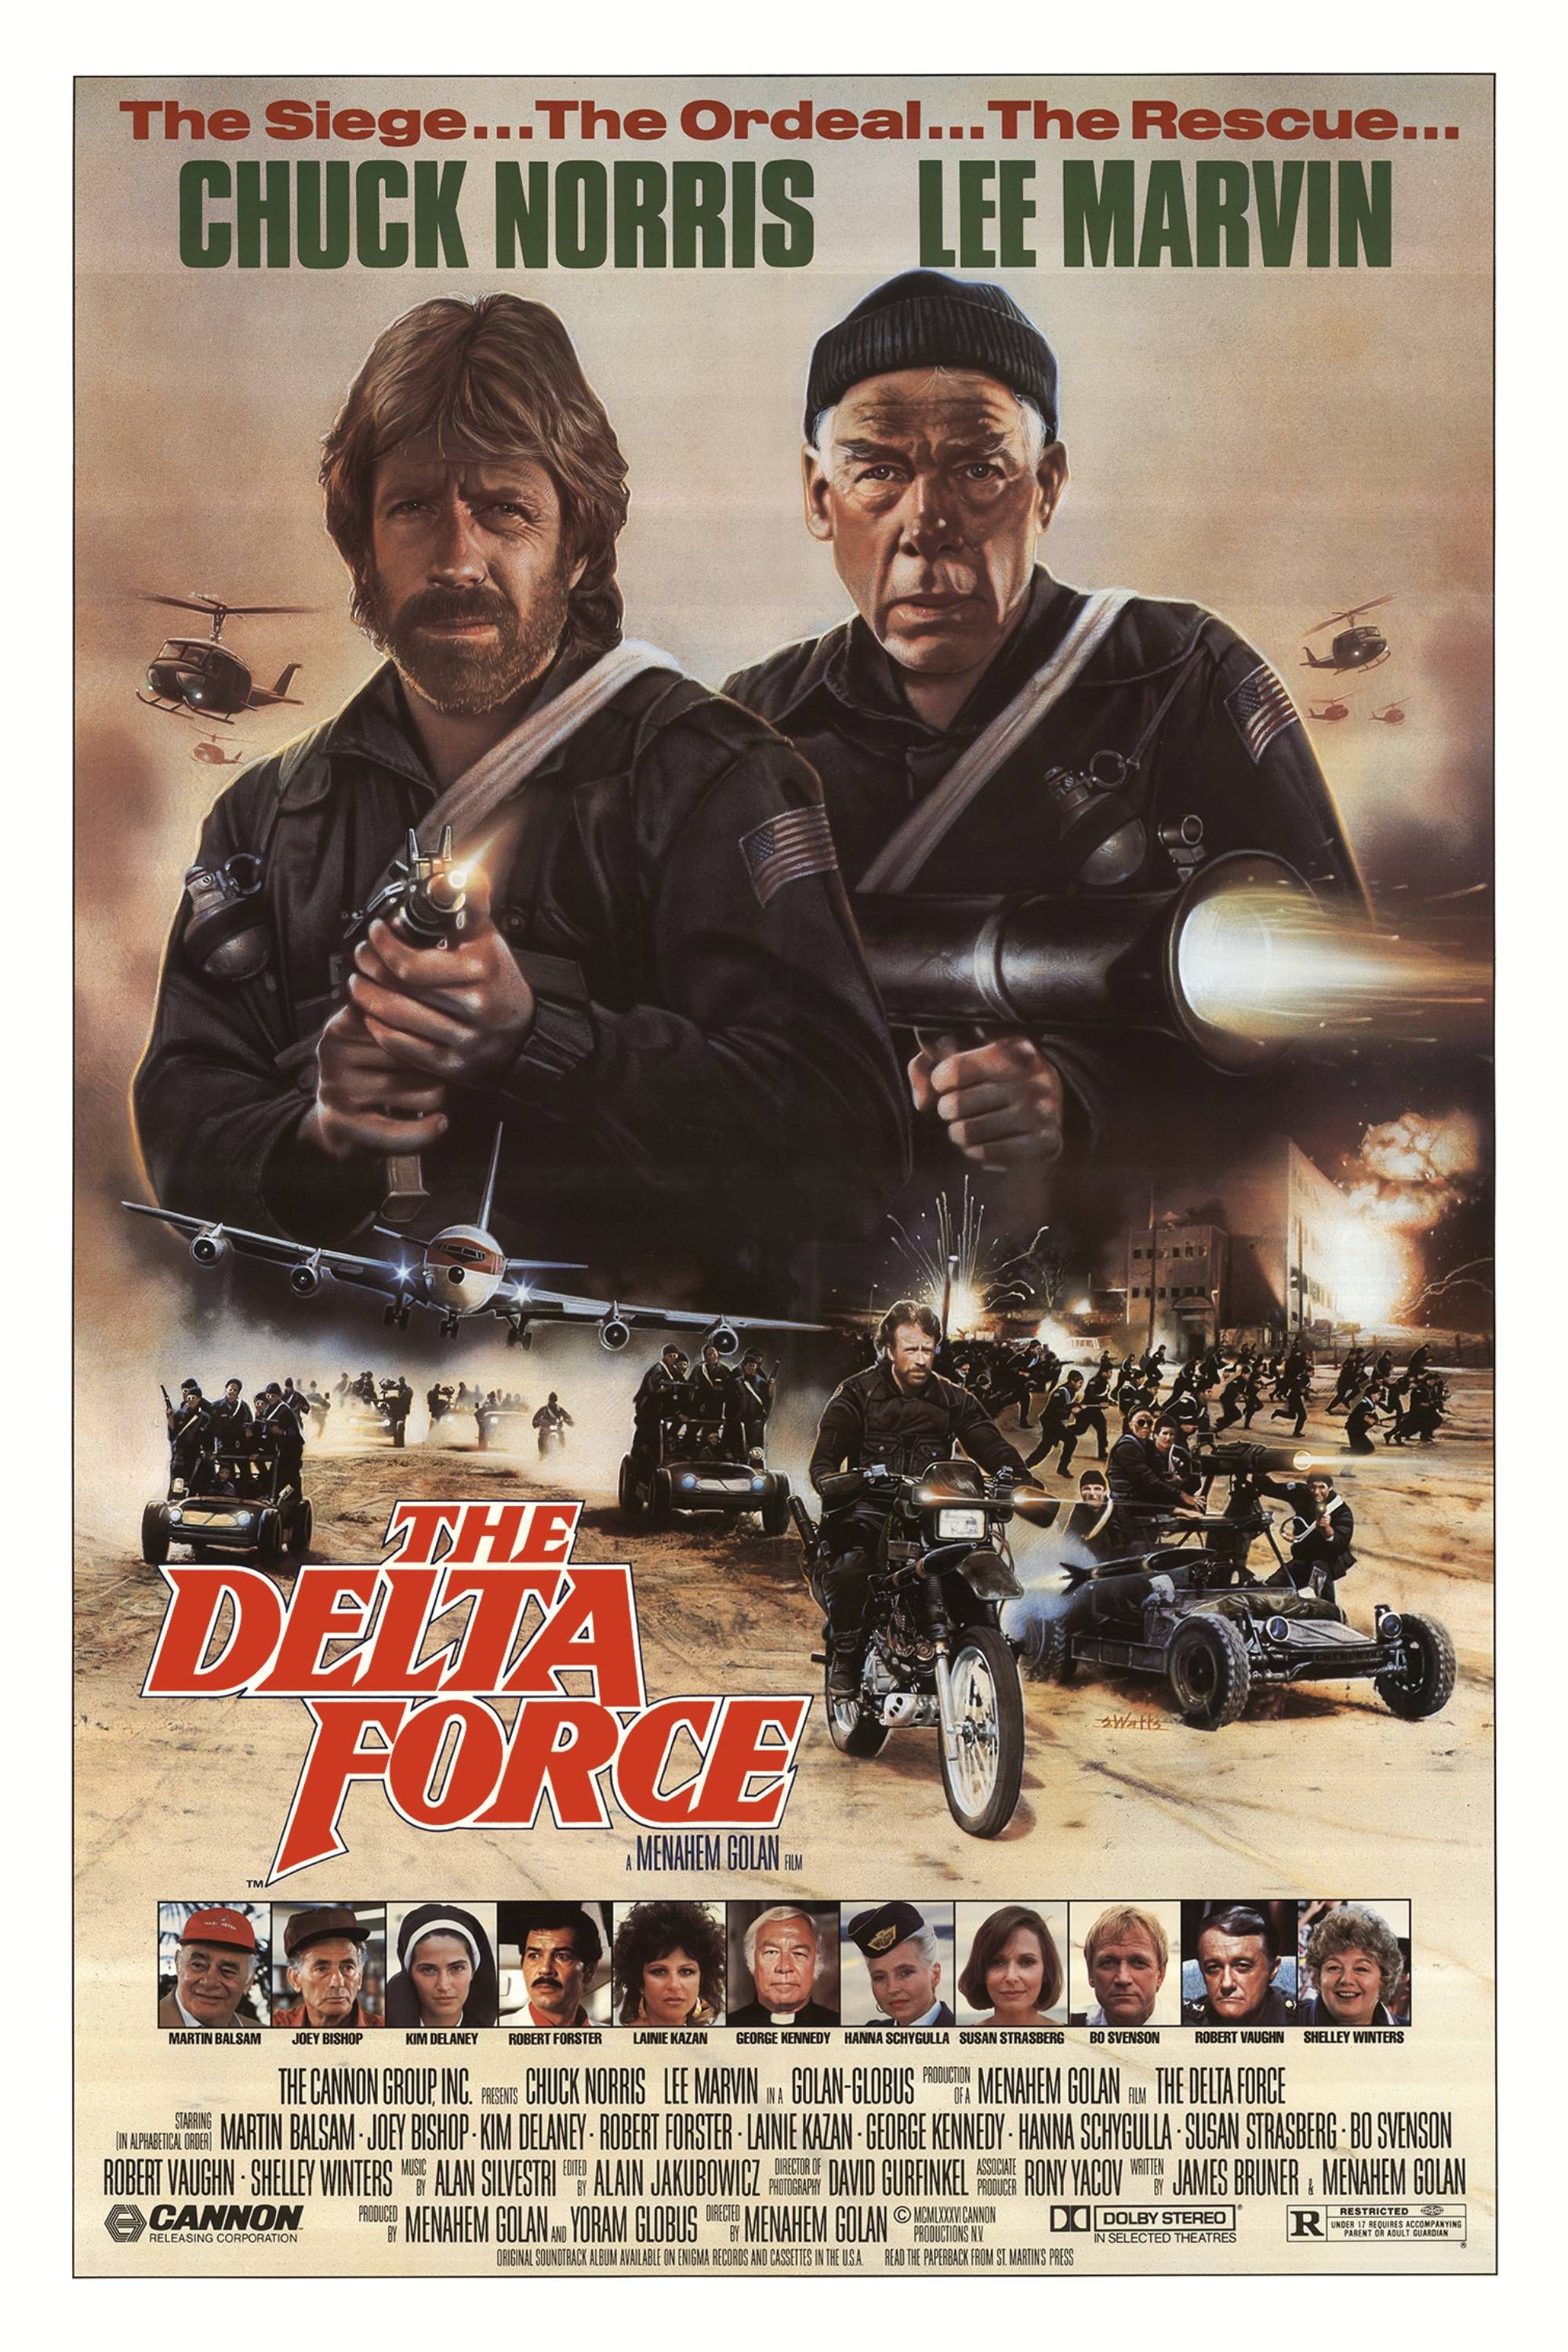 The Delta Force (1986) - pôster - chuck norris e lee marvin